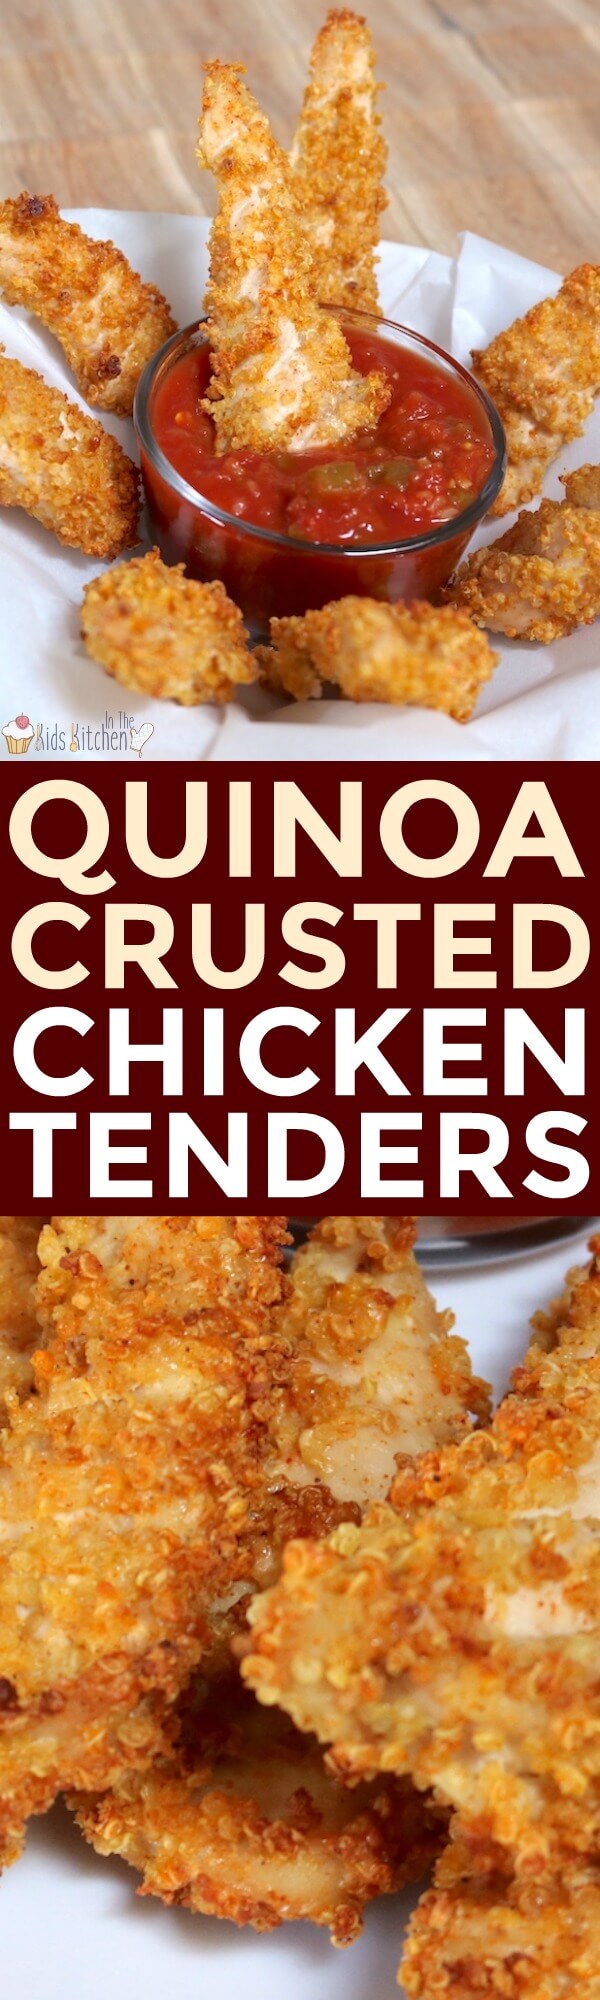 Crunchy on the outside, tender and juicy on the inside - our Quinoa Crusted Chicken Fingers are a deliciously healthy update on a comfort food classic!